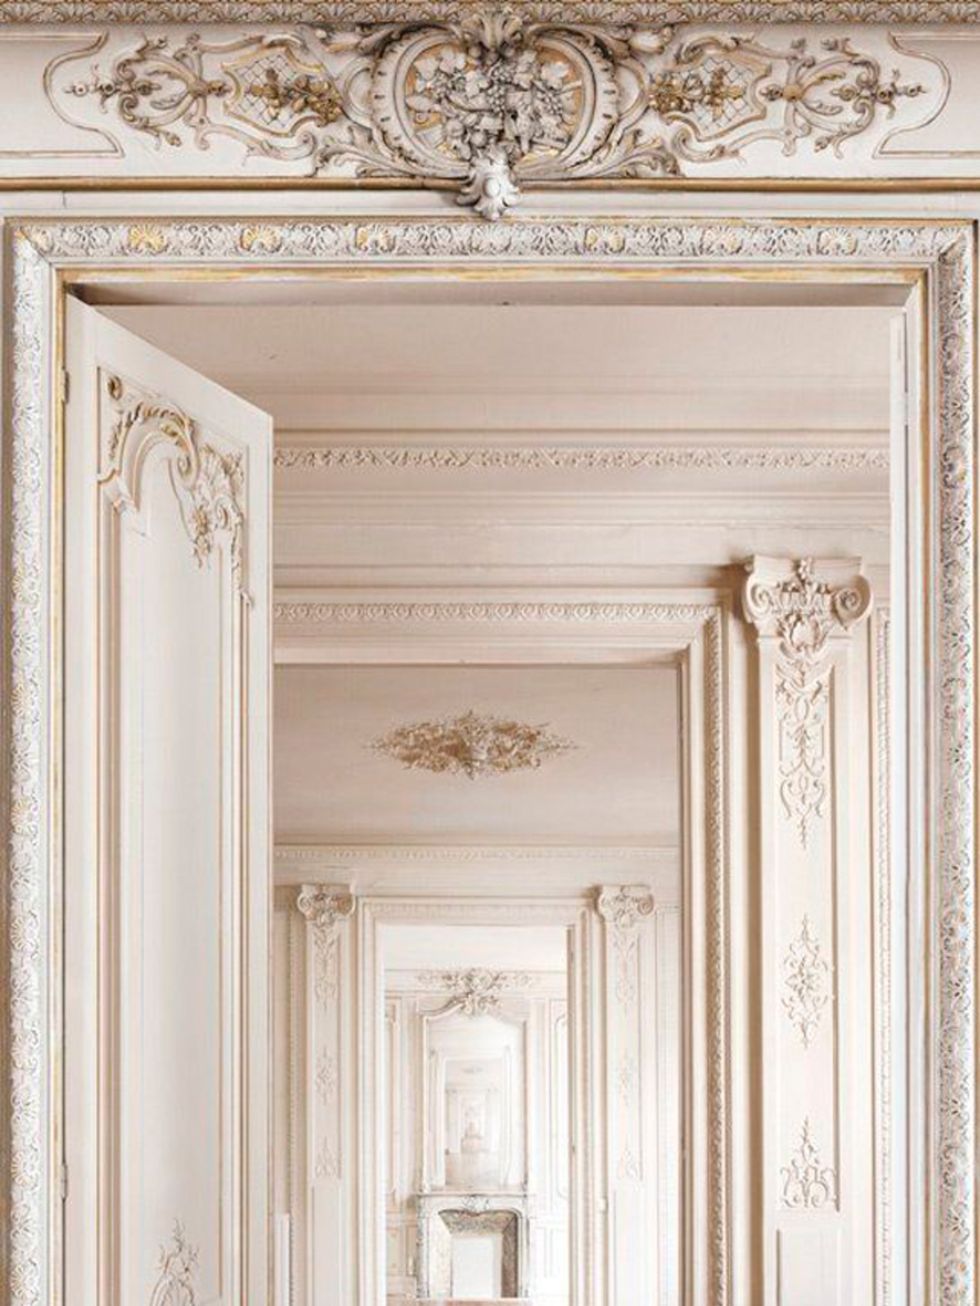 Ceiling, Molding, Carving, Classical architecture, Symmetry, Home door, Building material, Creative arts, Ornament, 